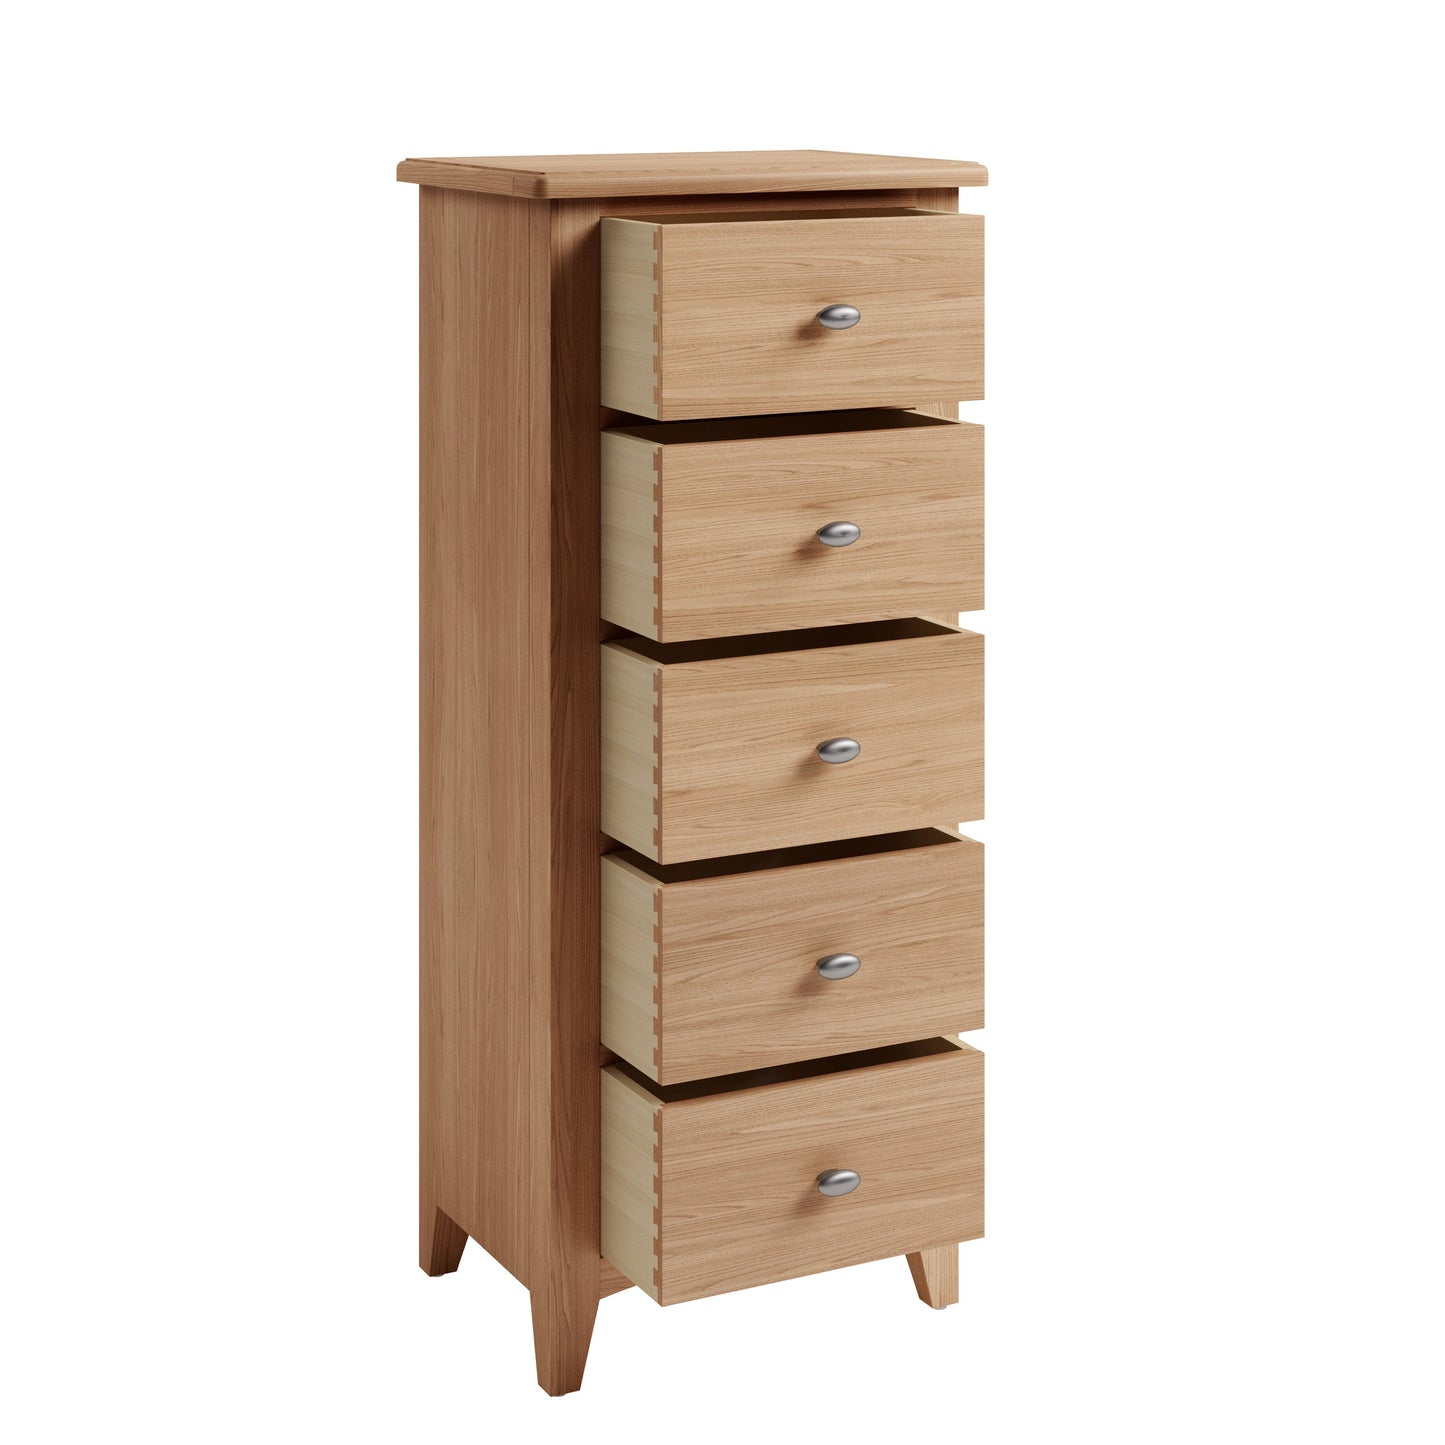 Guildford 5 Drawer Narrow Chest